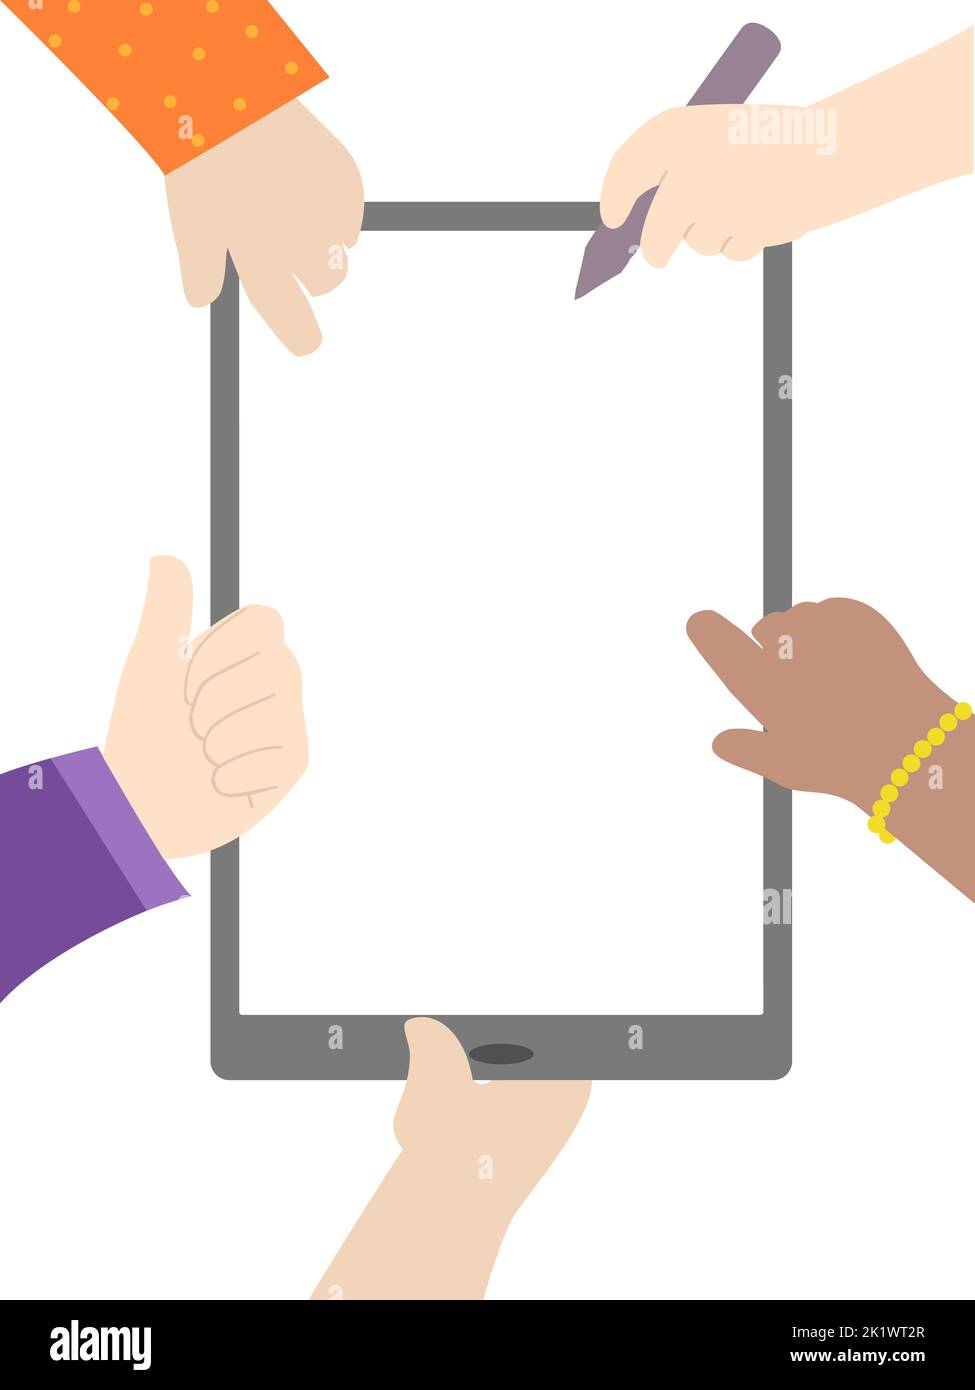 Illustration of Hands of Kids Holding and Pointing to the Tablet Computer Blank Frame with One Kid Holding a Pen Stock Photo